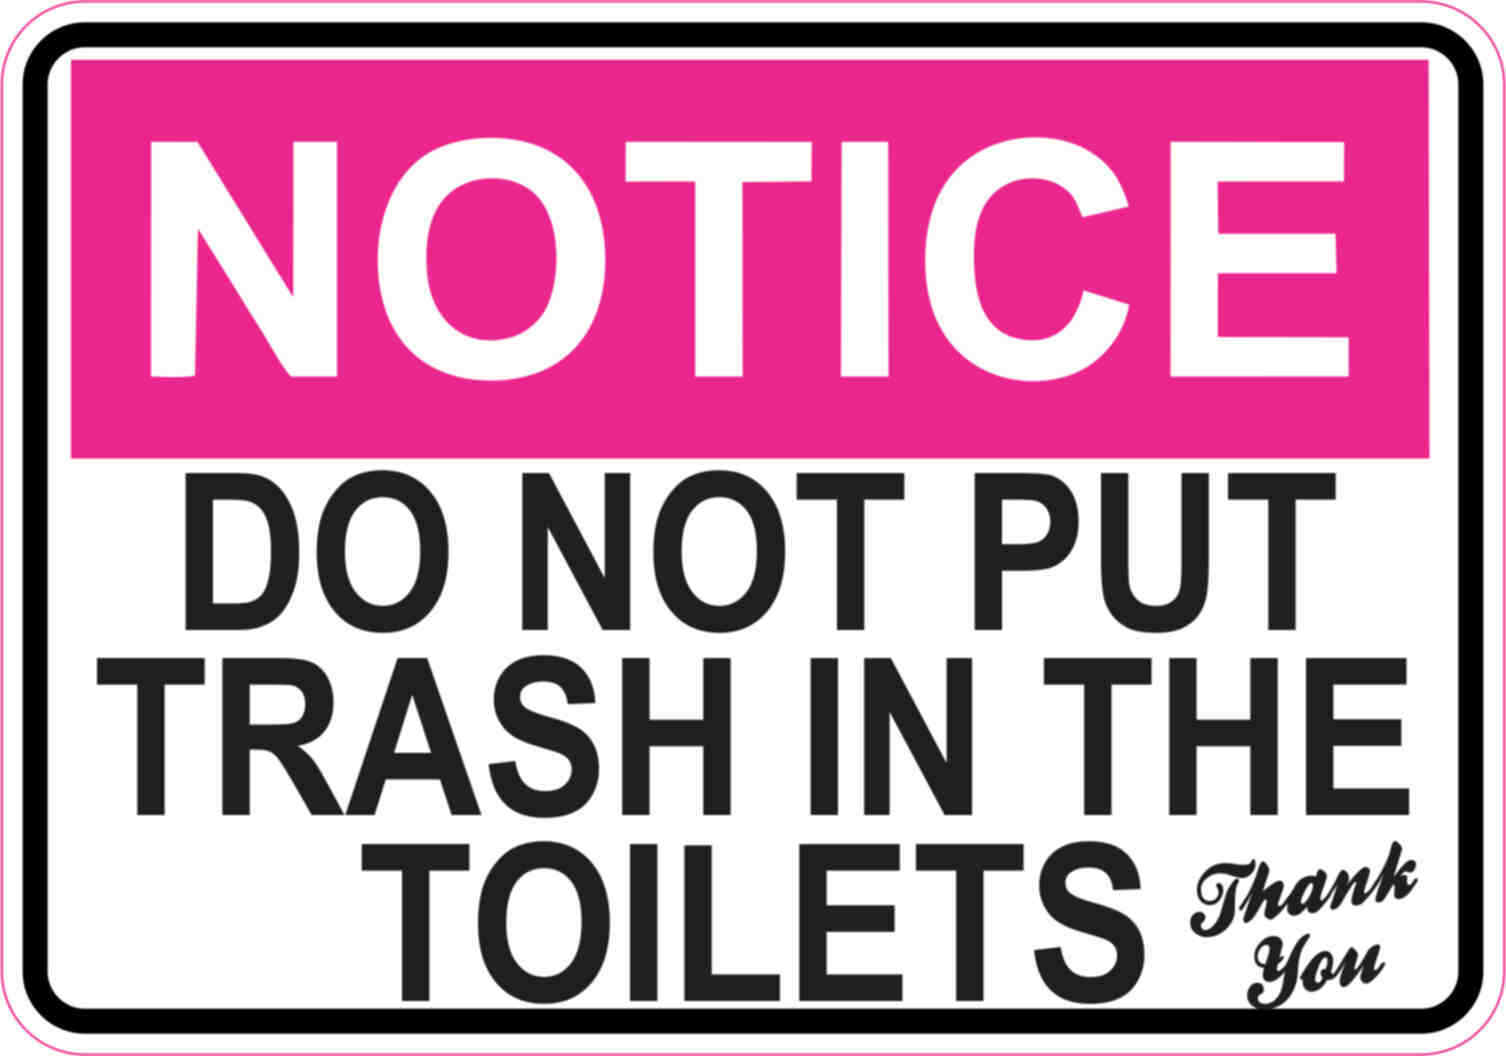 5 x 3.5 Pink Do Not Put Trash In The Toilets Sticker Vinyl Sign Stickers Signs